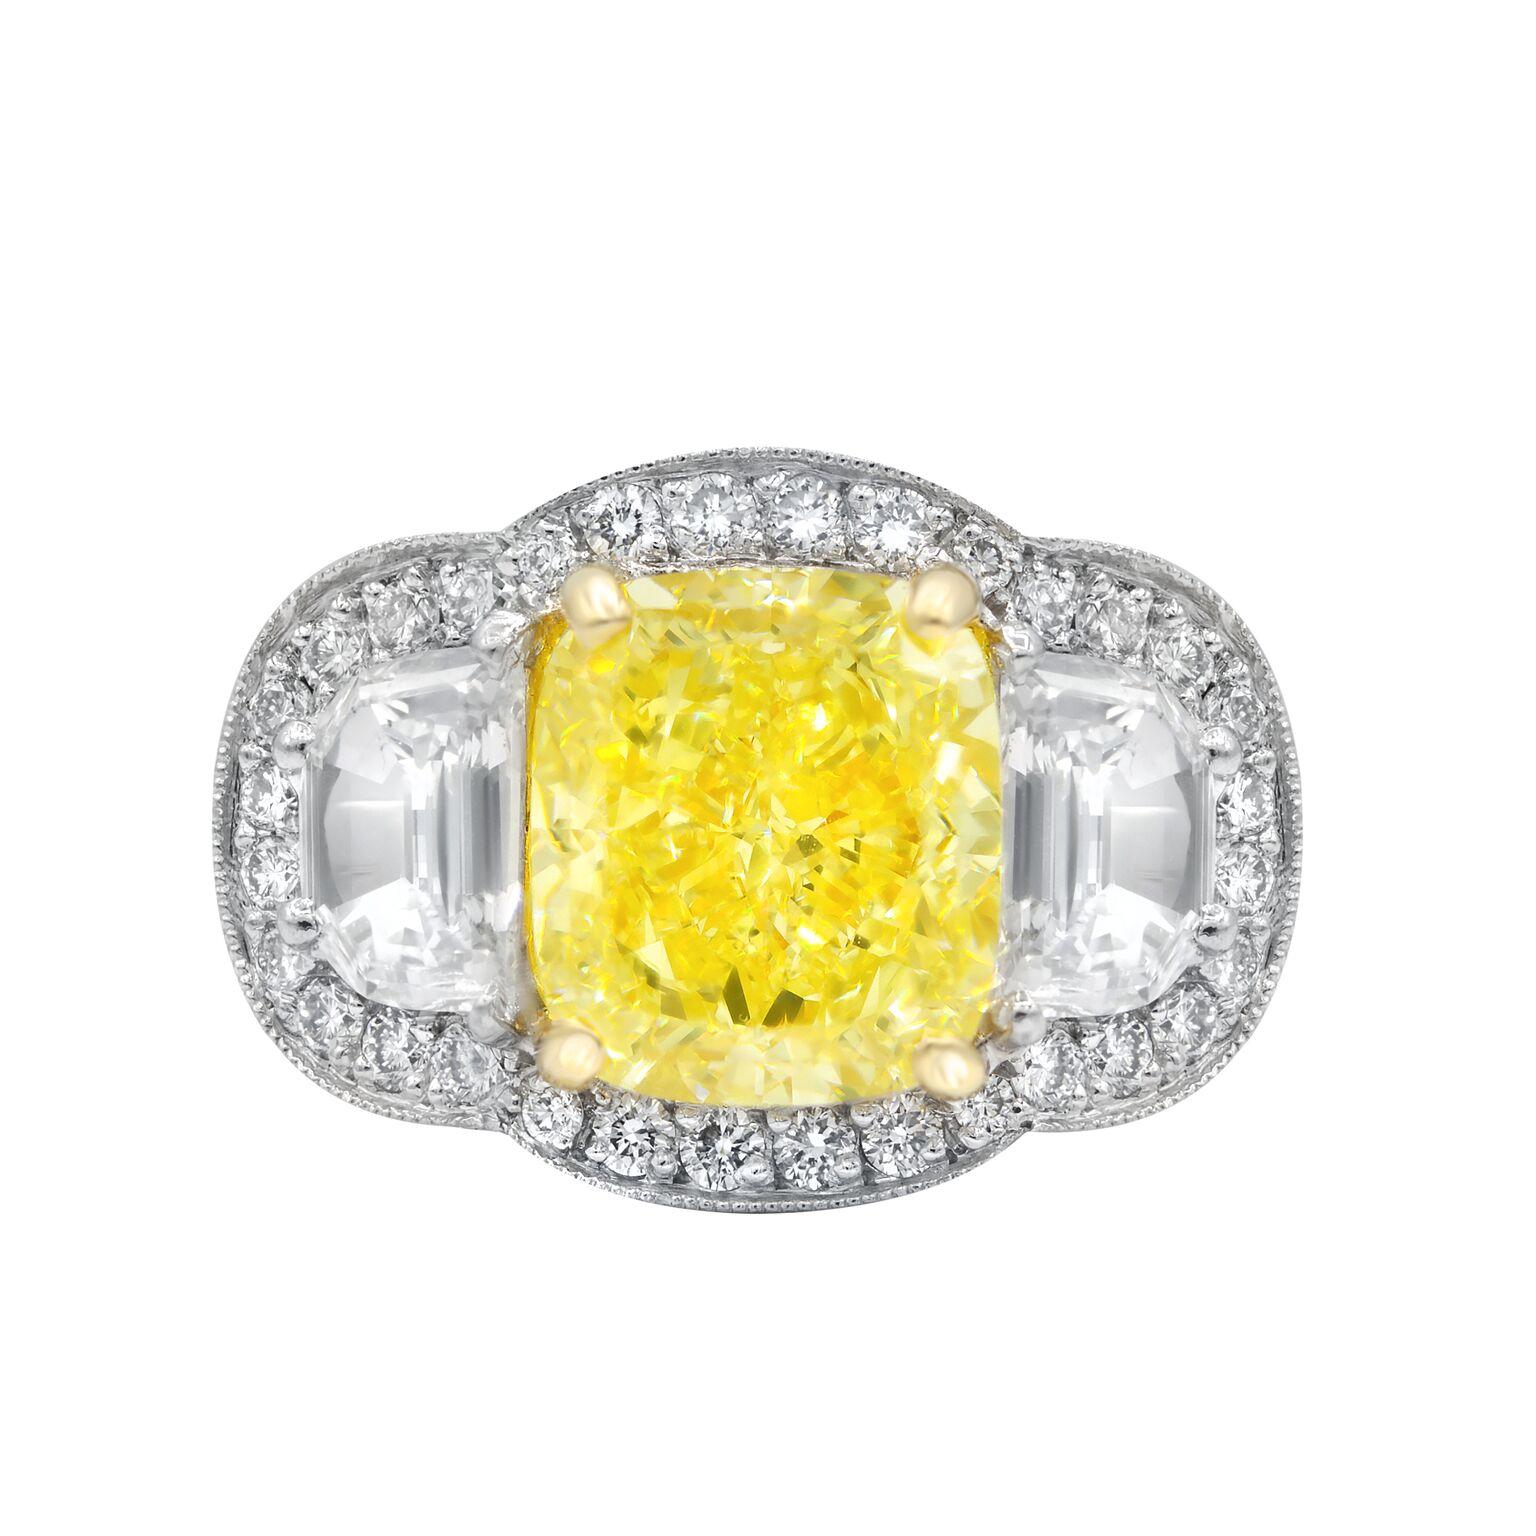 DIANA M. Platinum 5.23CTS FY VS1 CUSHION  CUT YELLOW DIAMOND In New Condition For Sale In New York, NY